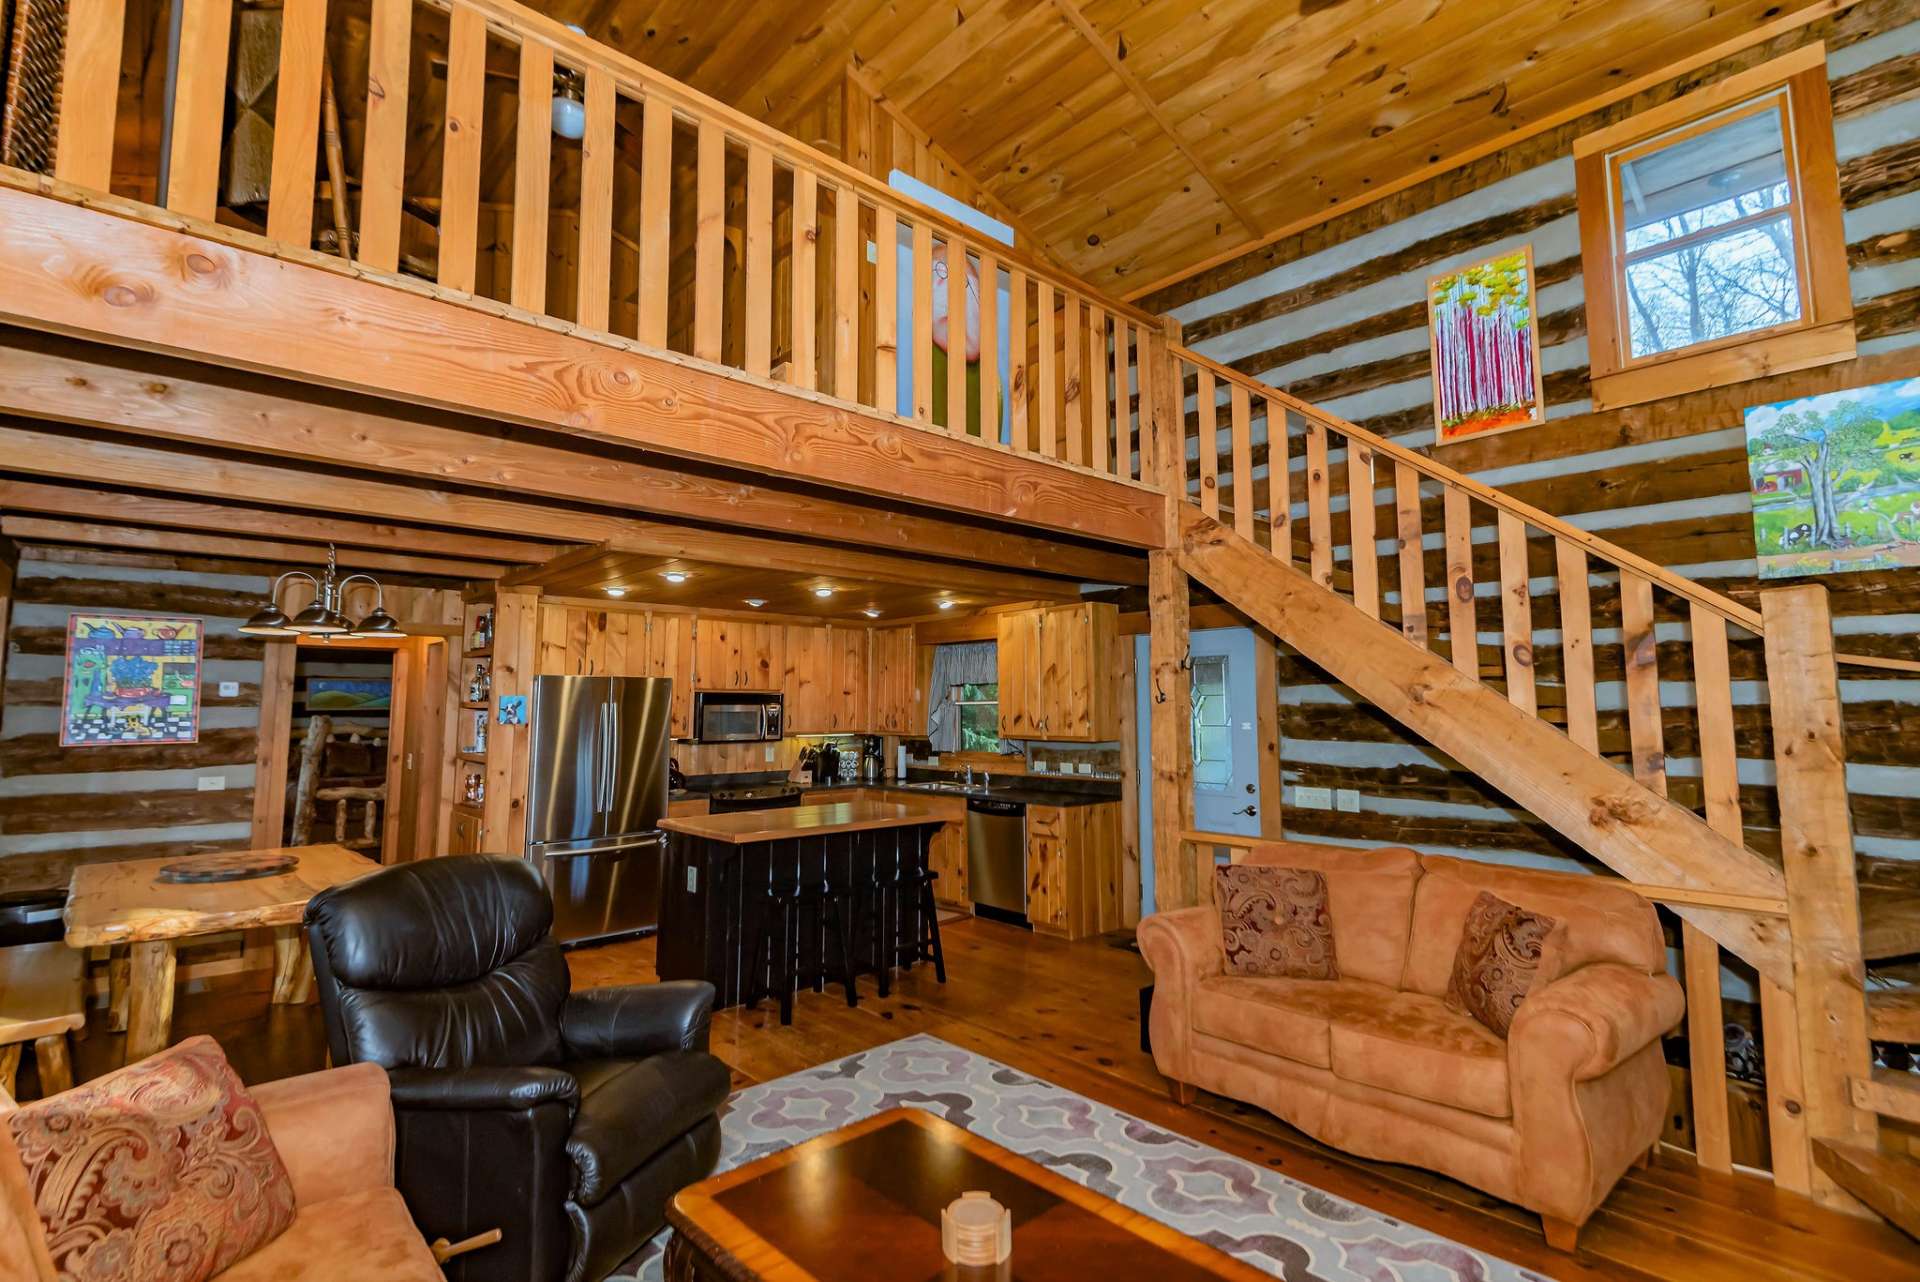 An open stairway with hand-hewn steps lead to the spacious loft.